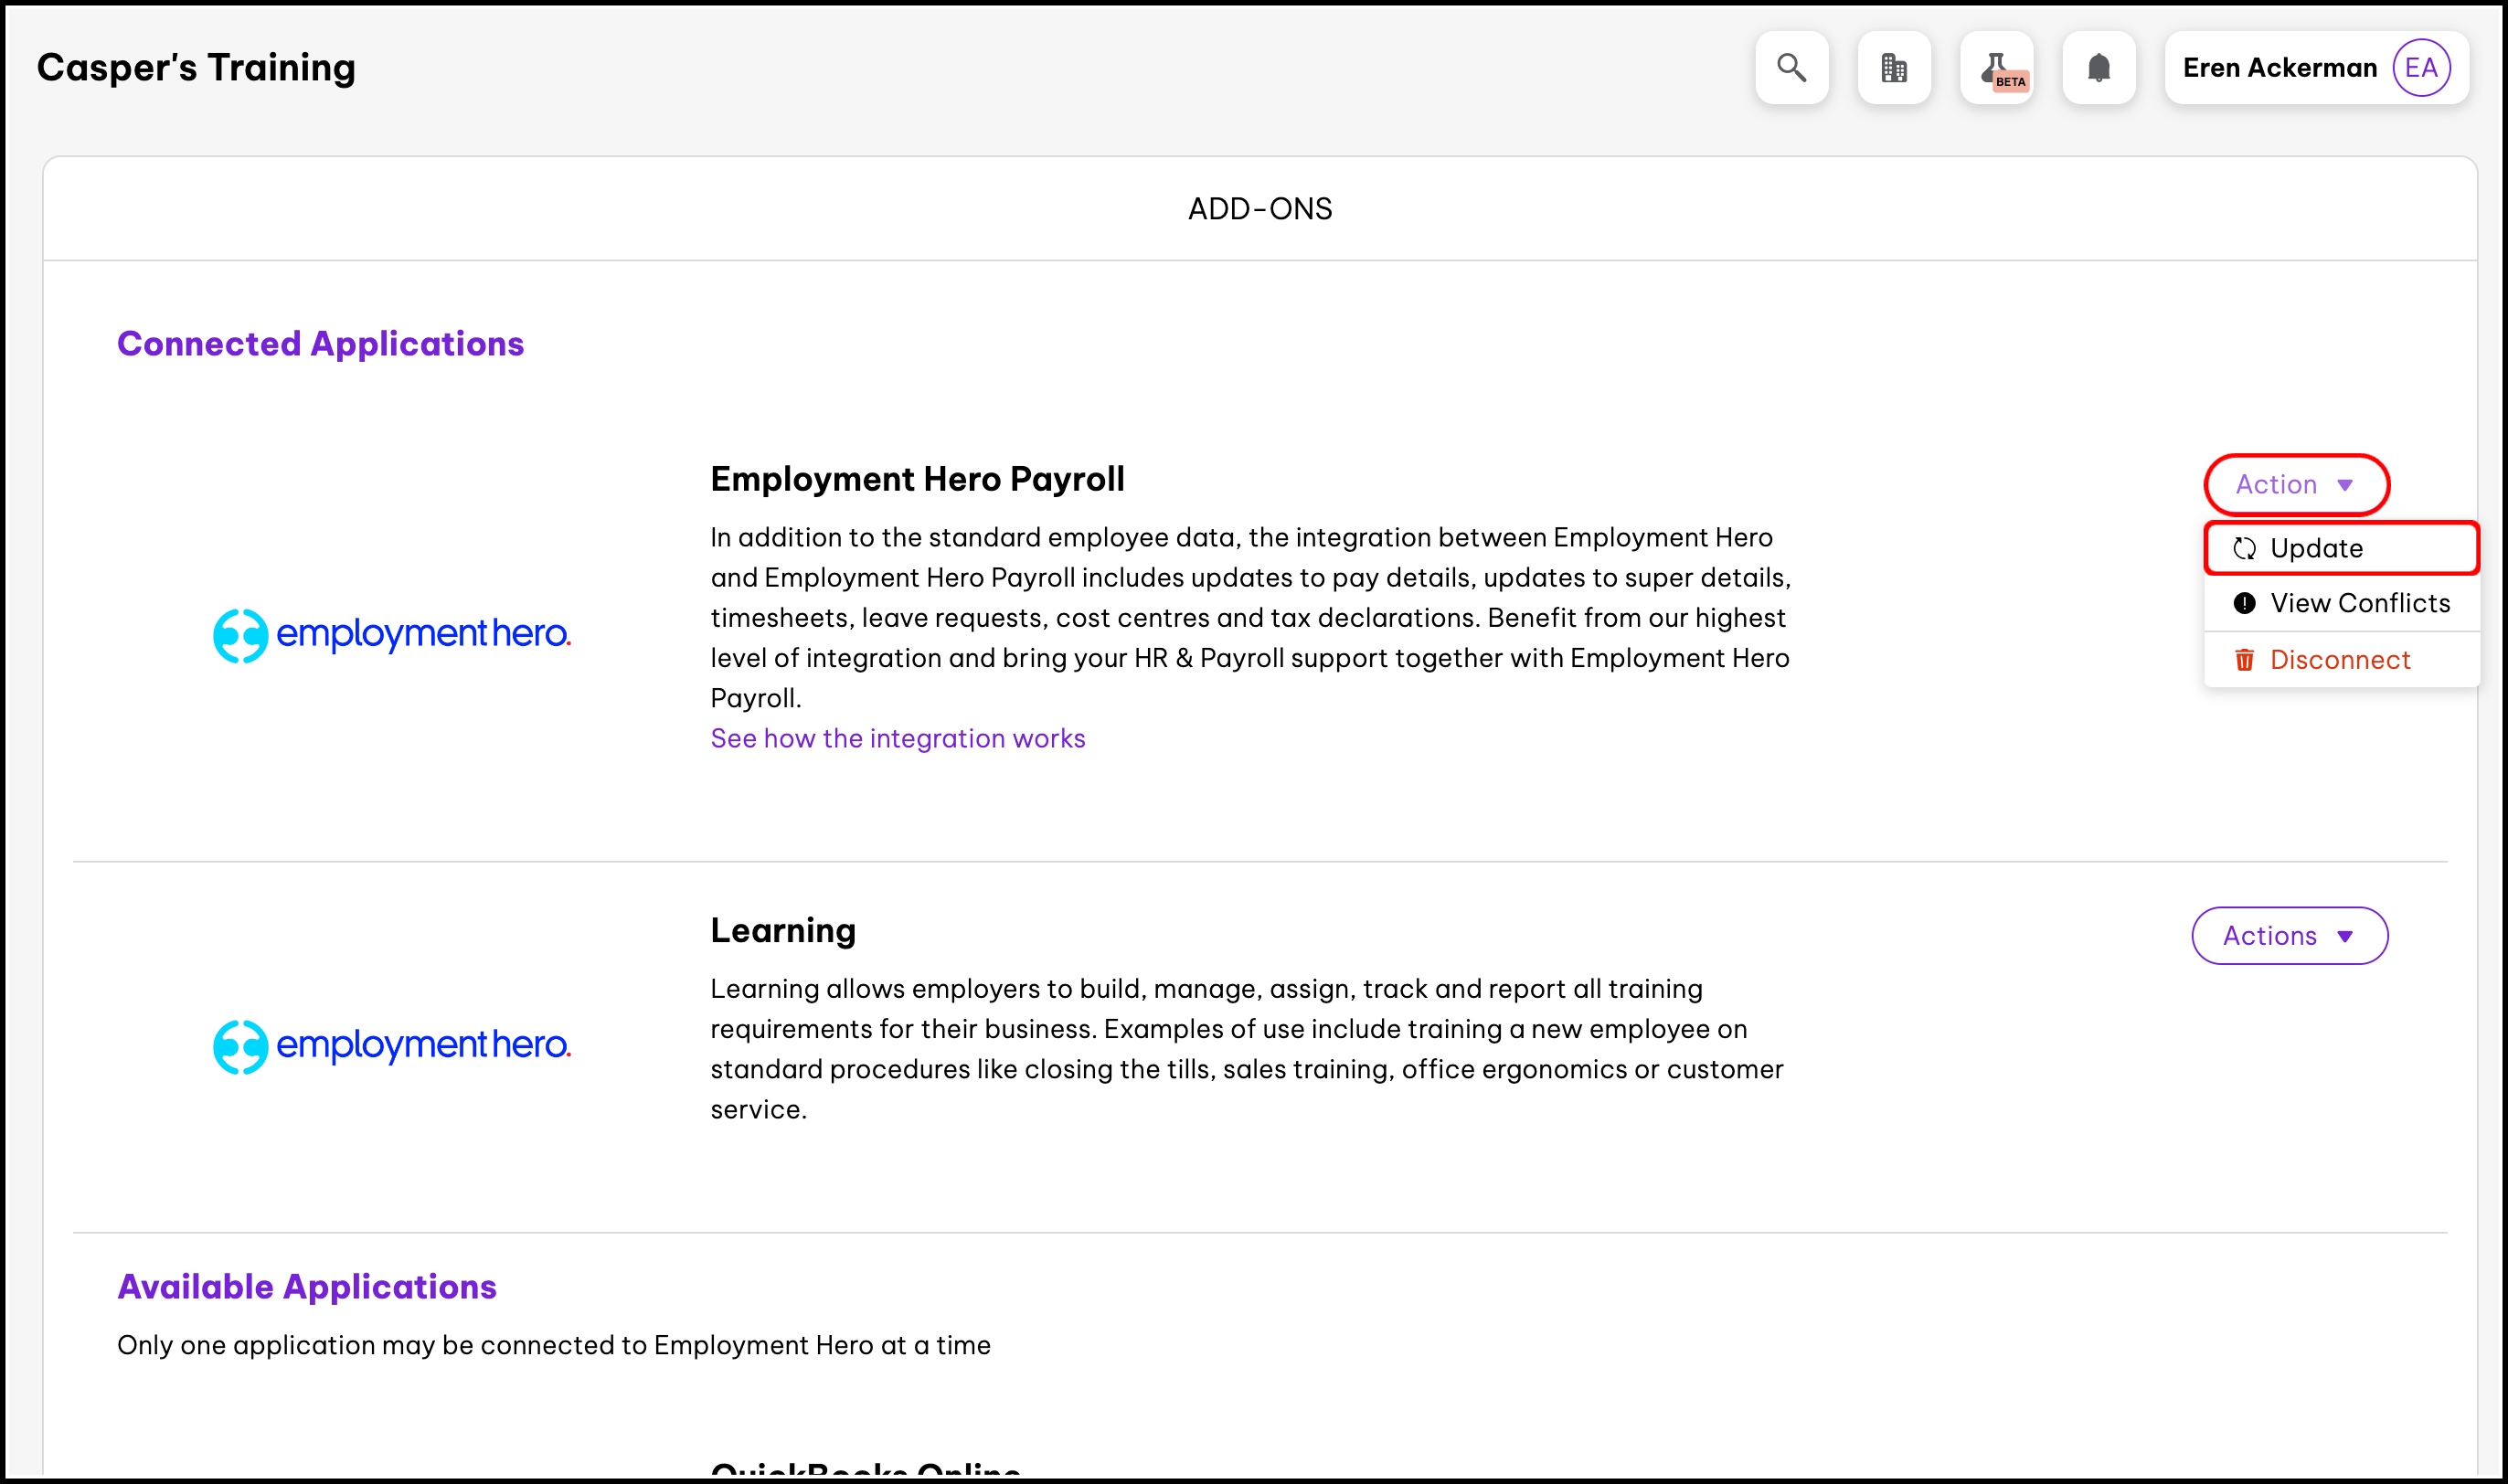 screenshot of the add ons screen, highlighting the action and update buttons for employment hero payroll